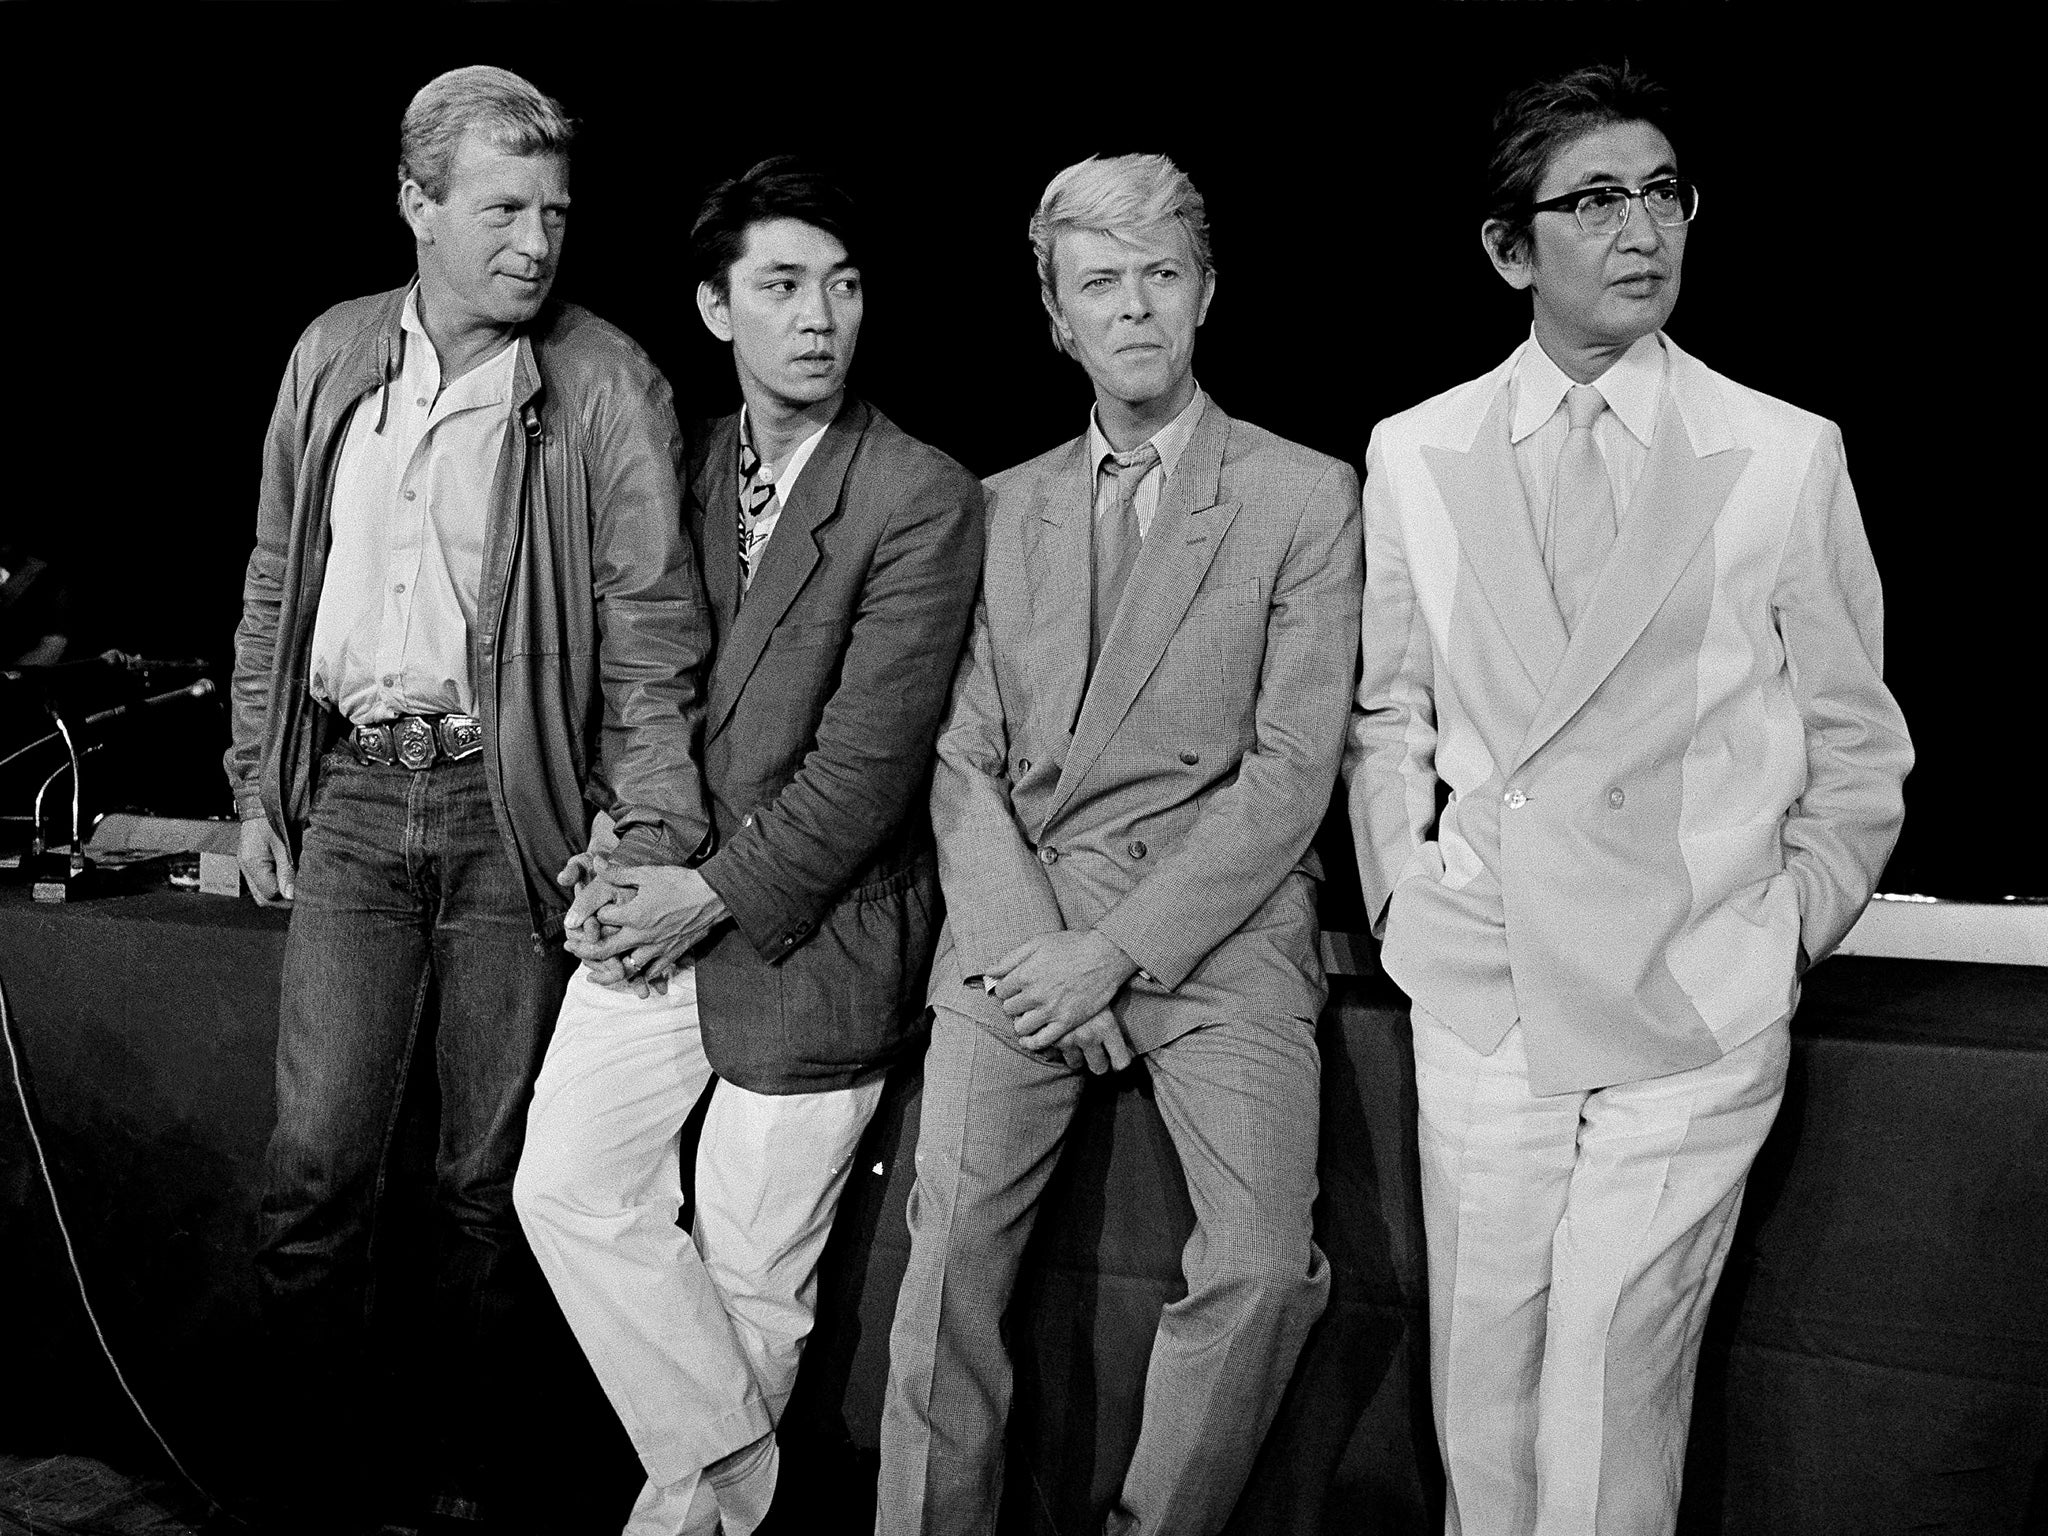 The team behind ‘Merry Christmas, Mr Lawrence’ in Paris in 1983. From left: Jack Thomas, Ryuichi Sakamoto, David Bowie, and Nagisa Oshima